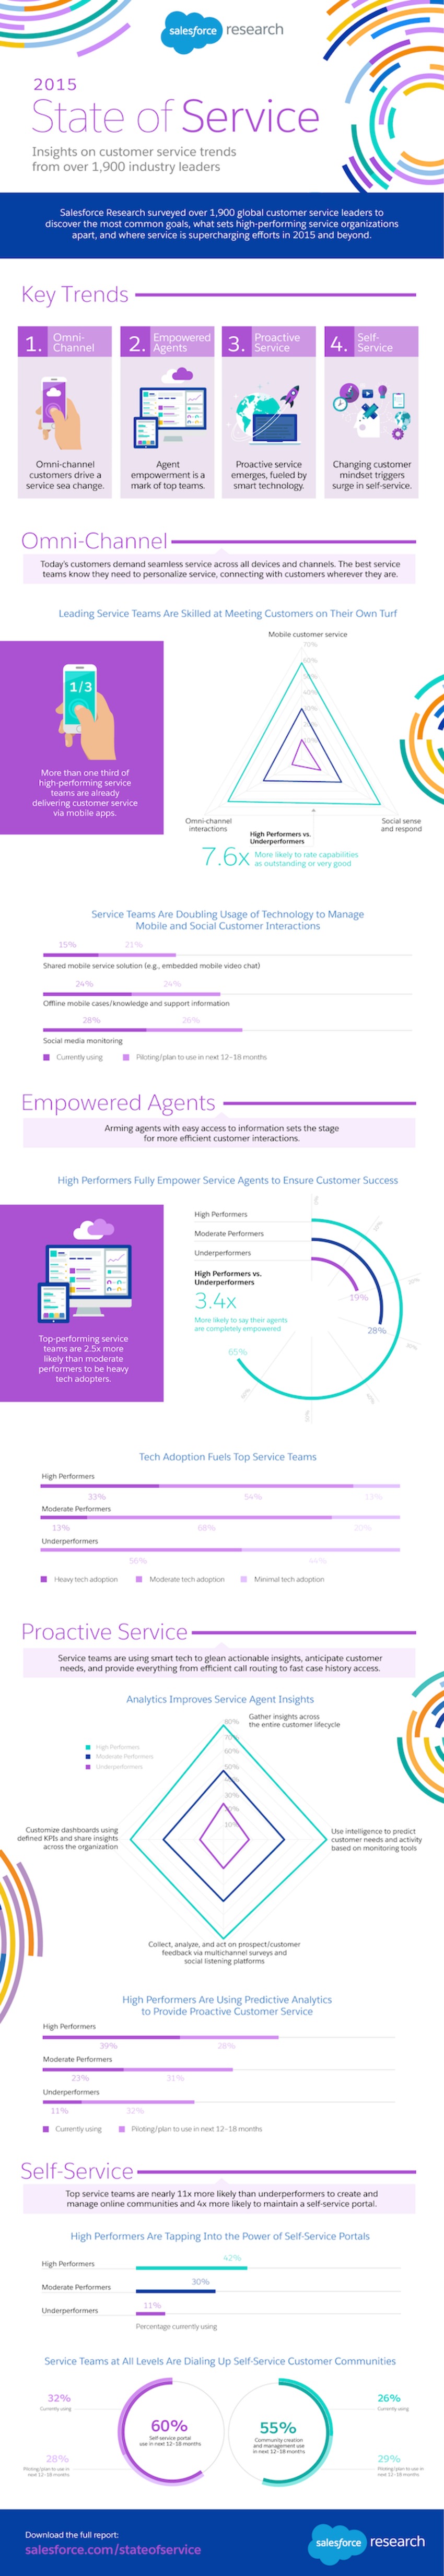 2015 State of Service [Infographic] - Salesforce | The MarTech Digest | Scoop.it